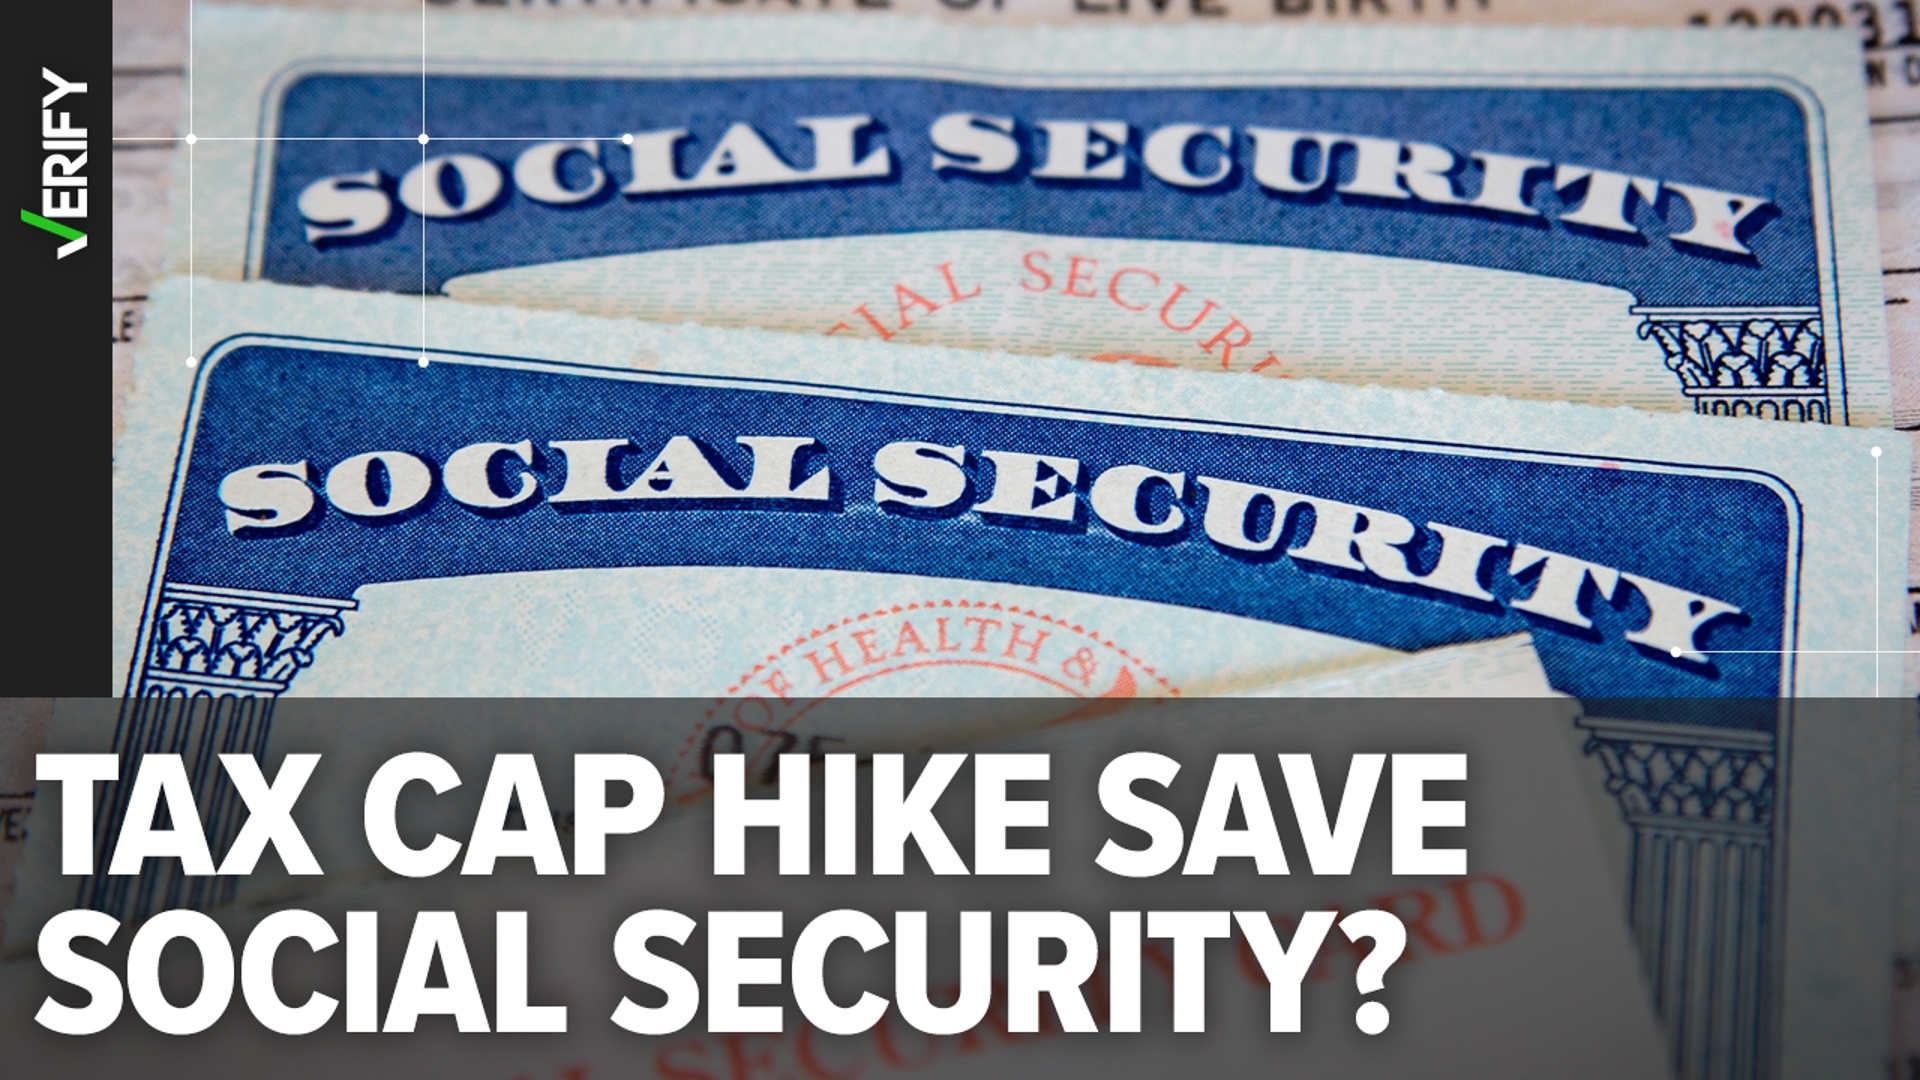 Would taxing more income from the rich fix Social Security’s financial problems and delay benefit cuts? It would help, but it wouldn't completely fix the issues.